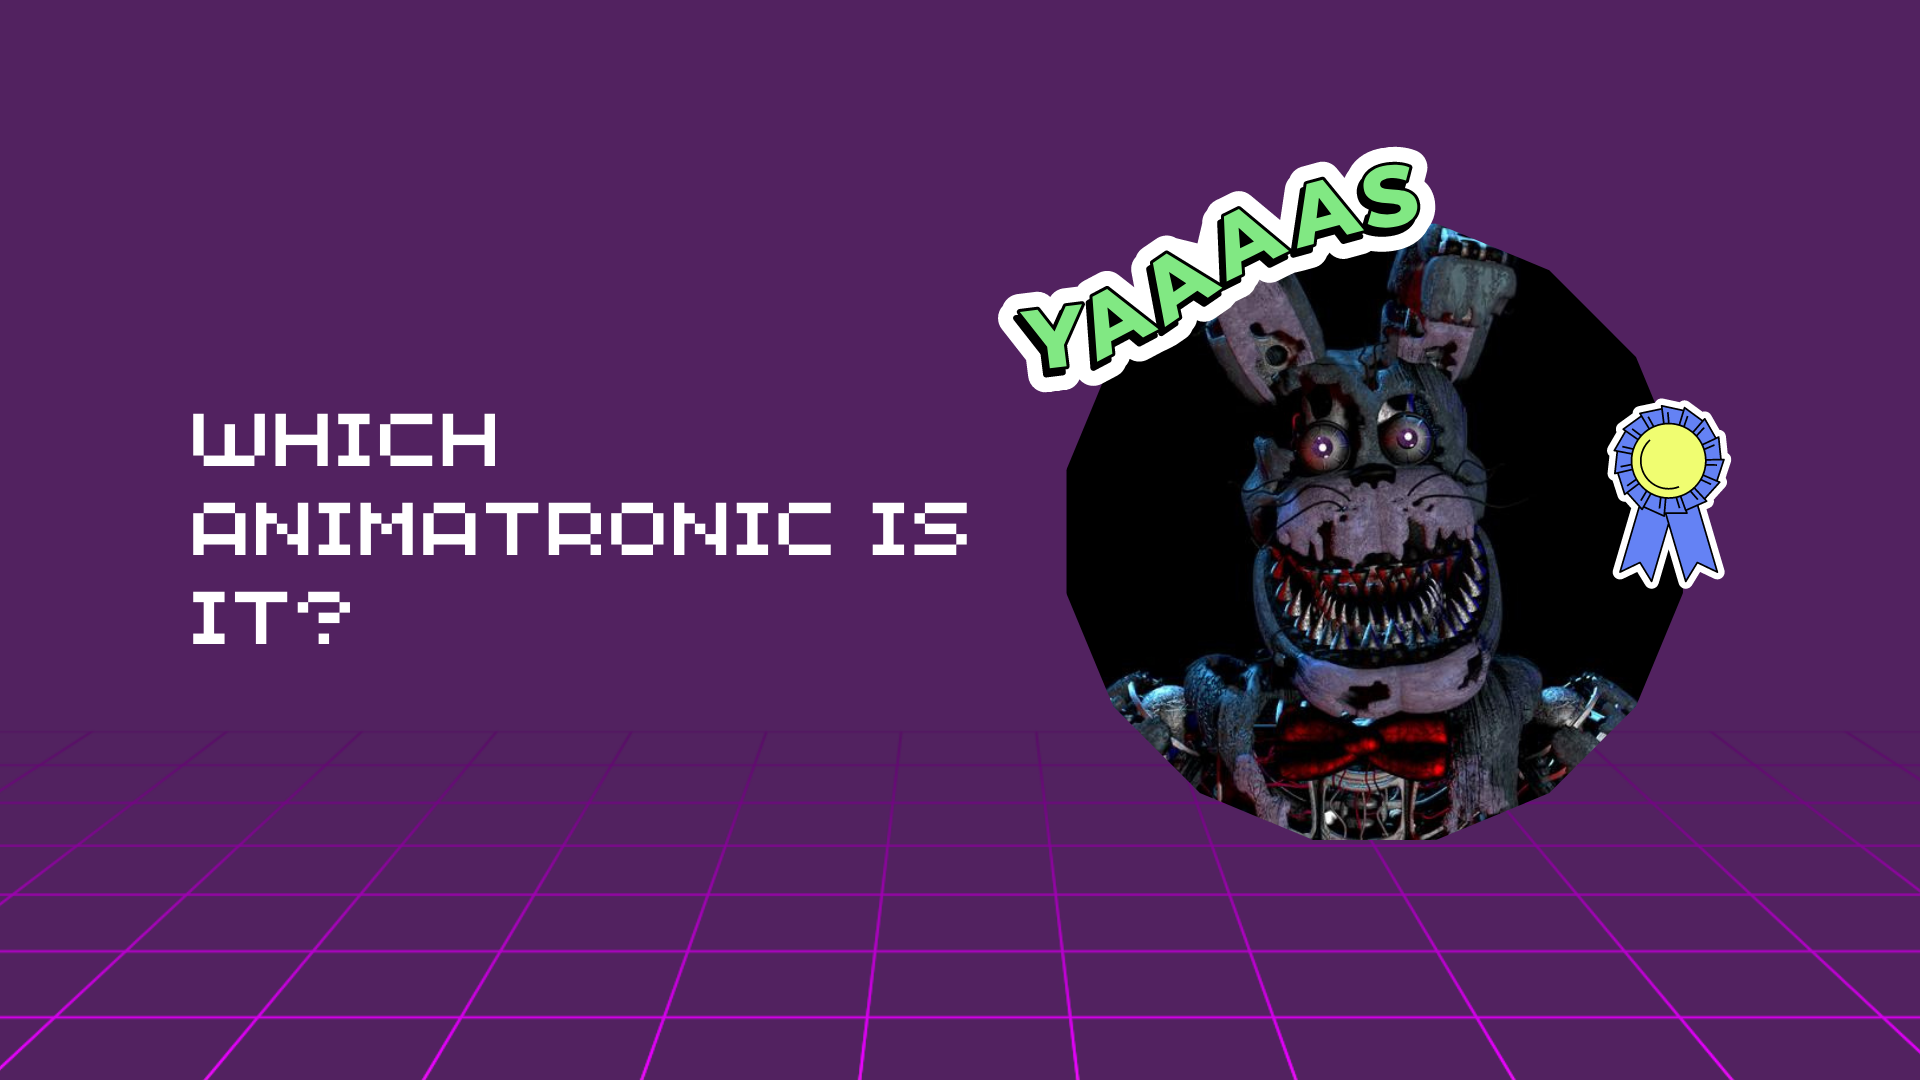 WHICH ANIMATRONIC IS IT?